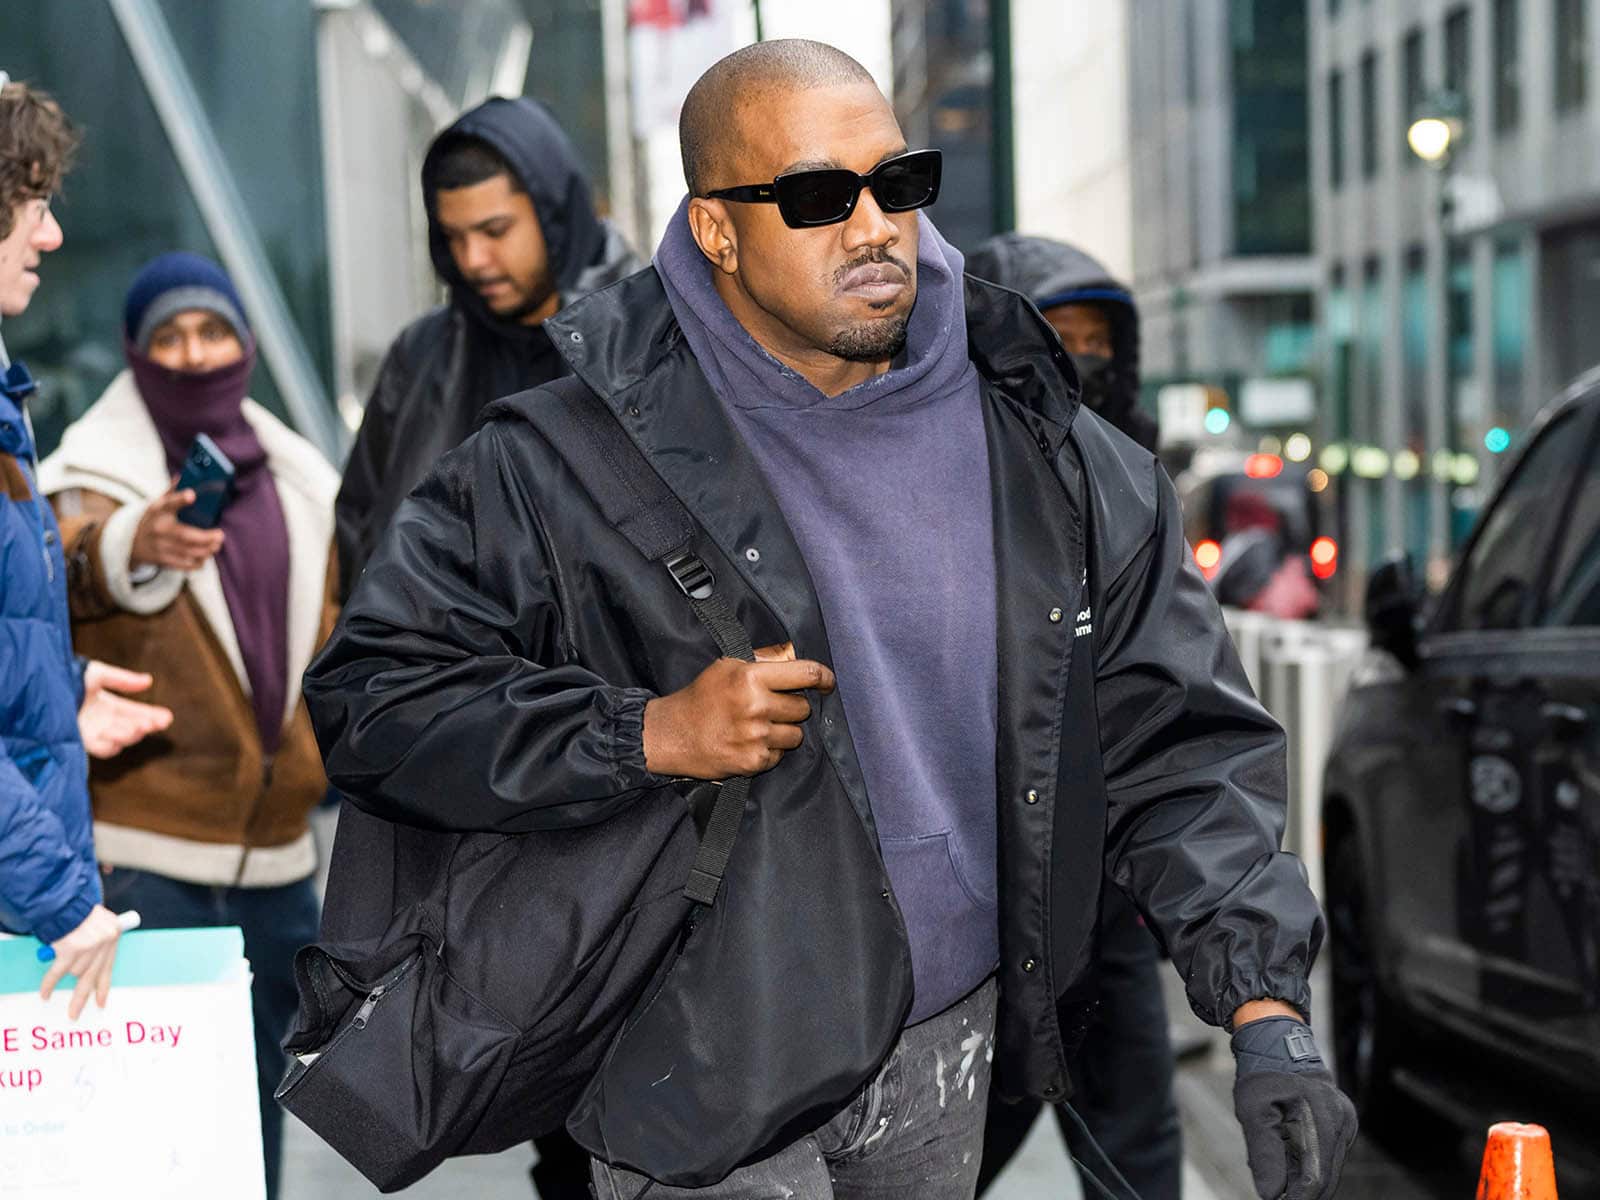 Gap could break off relationship with Kanye West